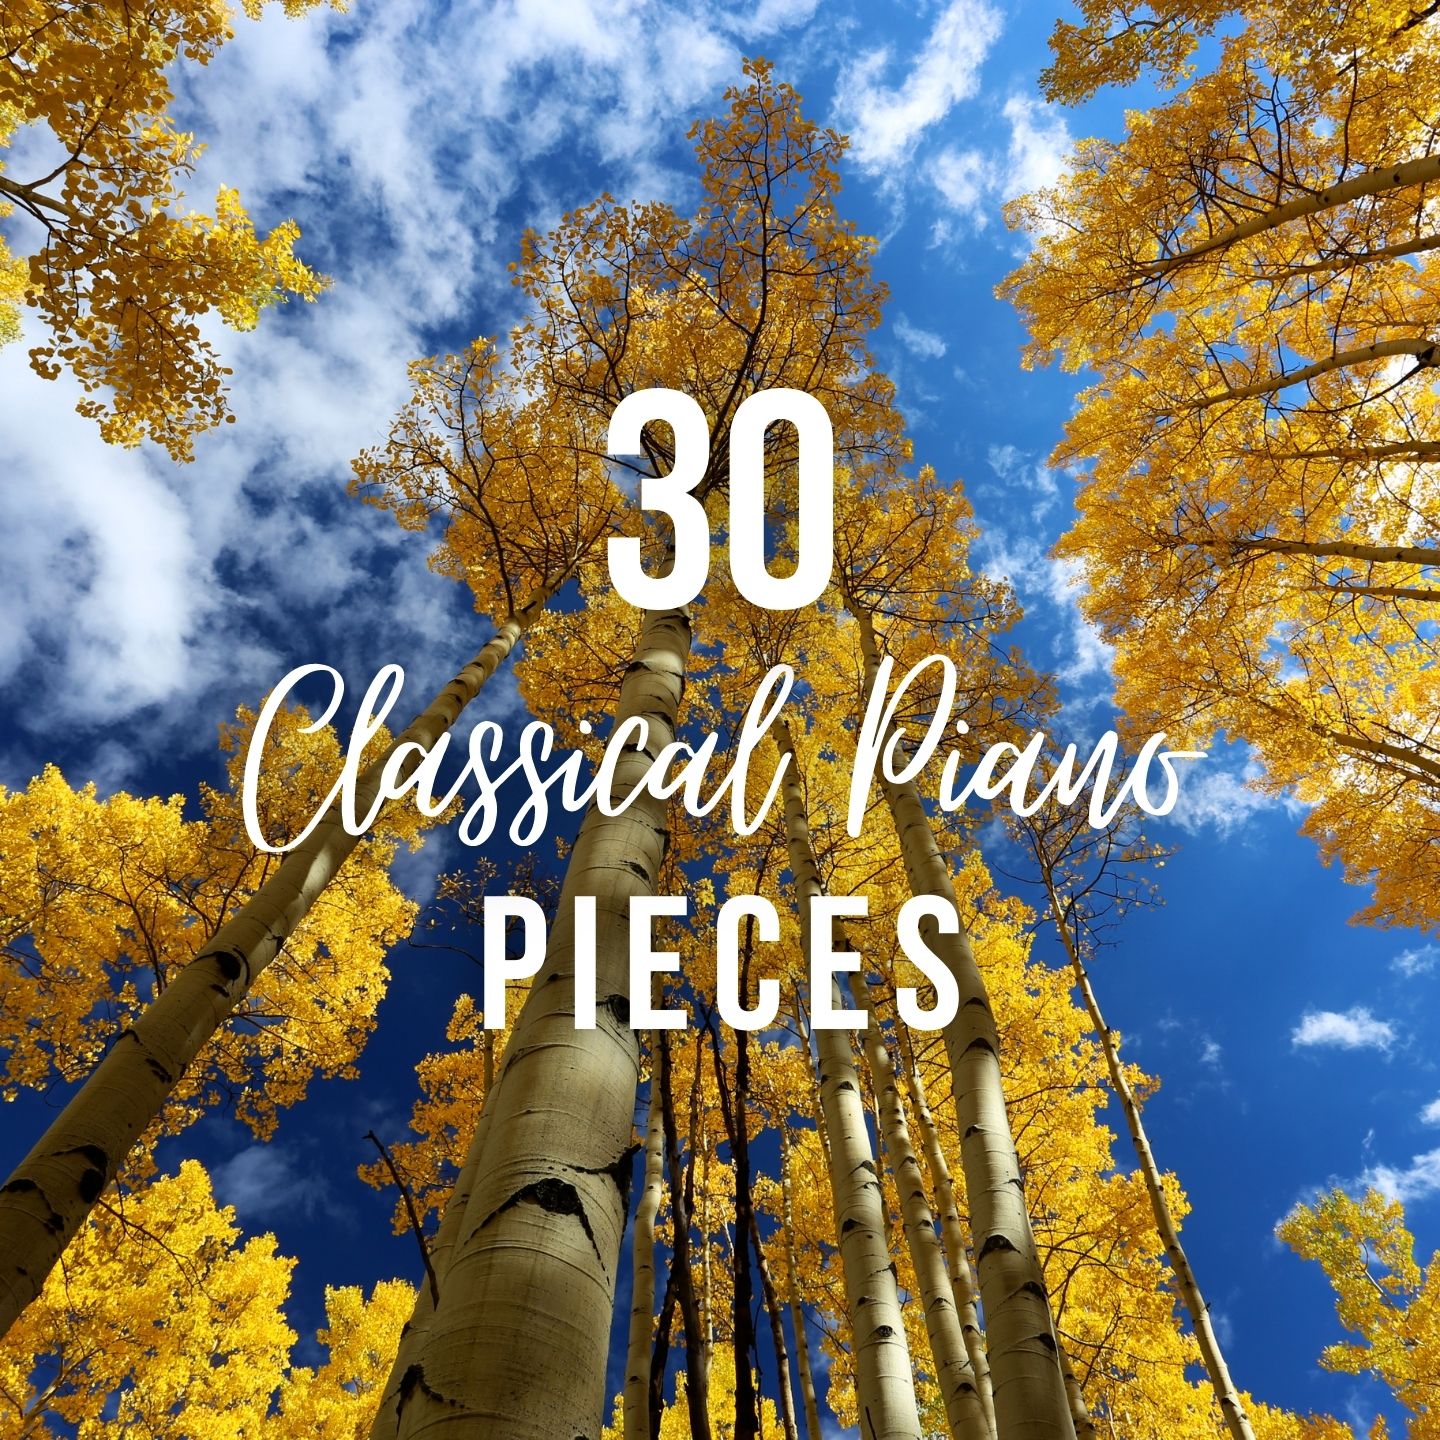 30 Most Beautiful Classical Piano Pieces